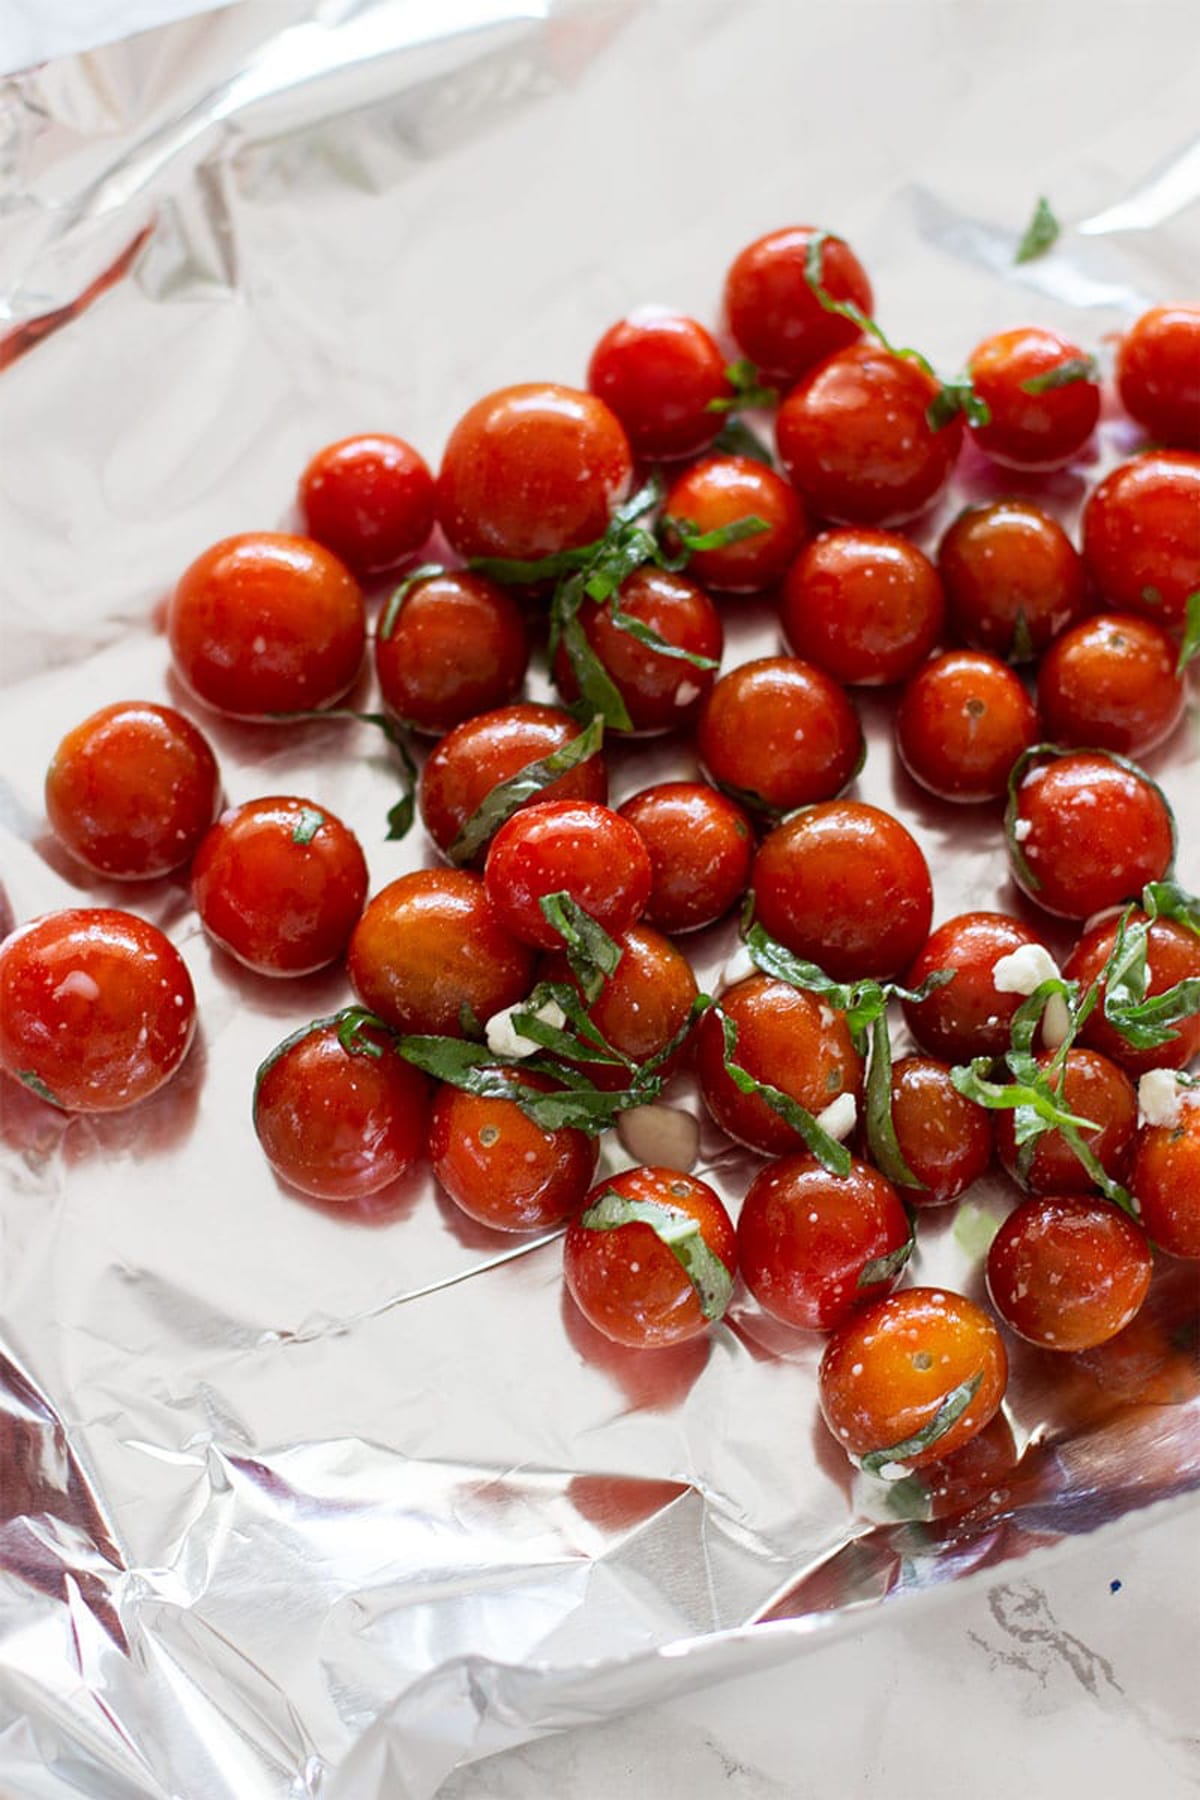 Raw cherry tomatoes with basil on aluminum foil.